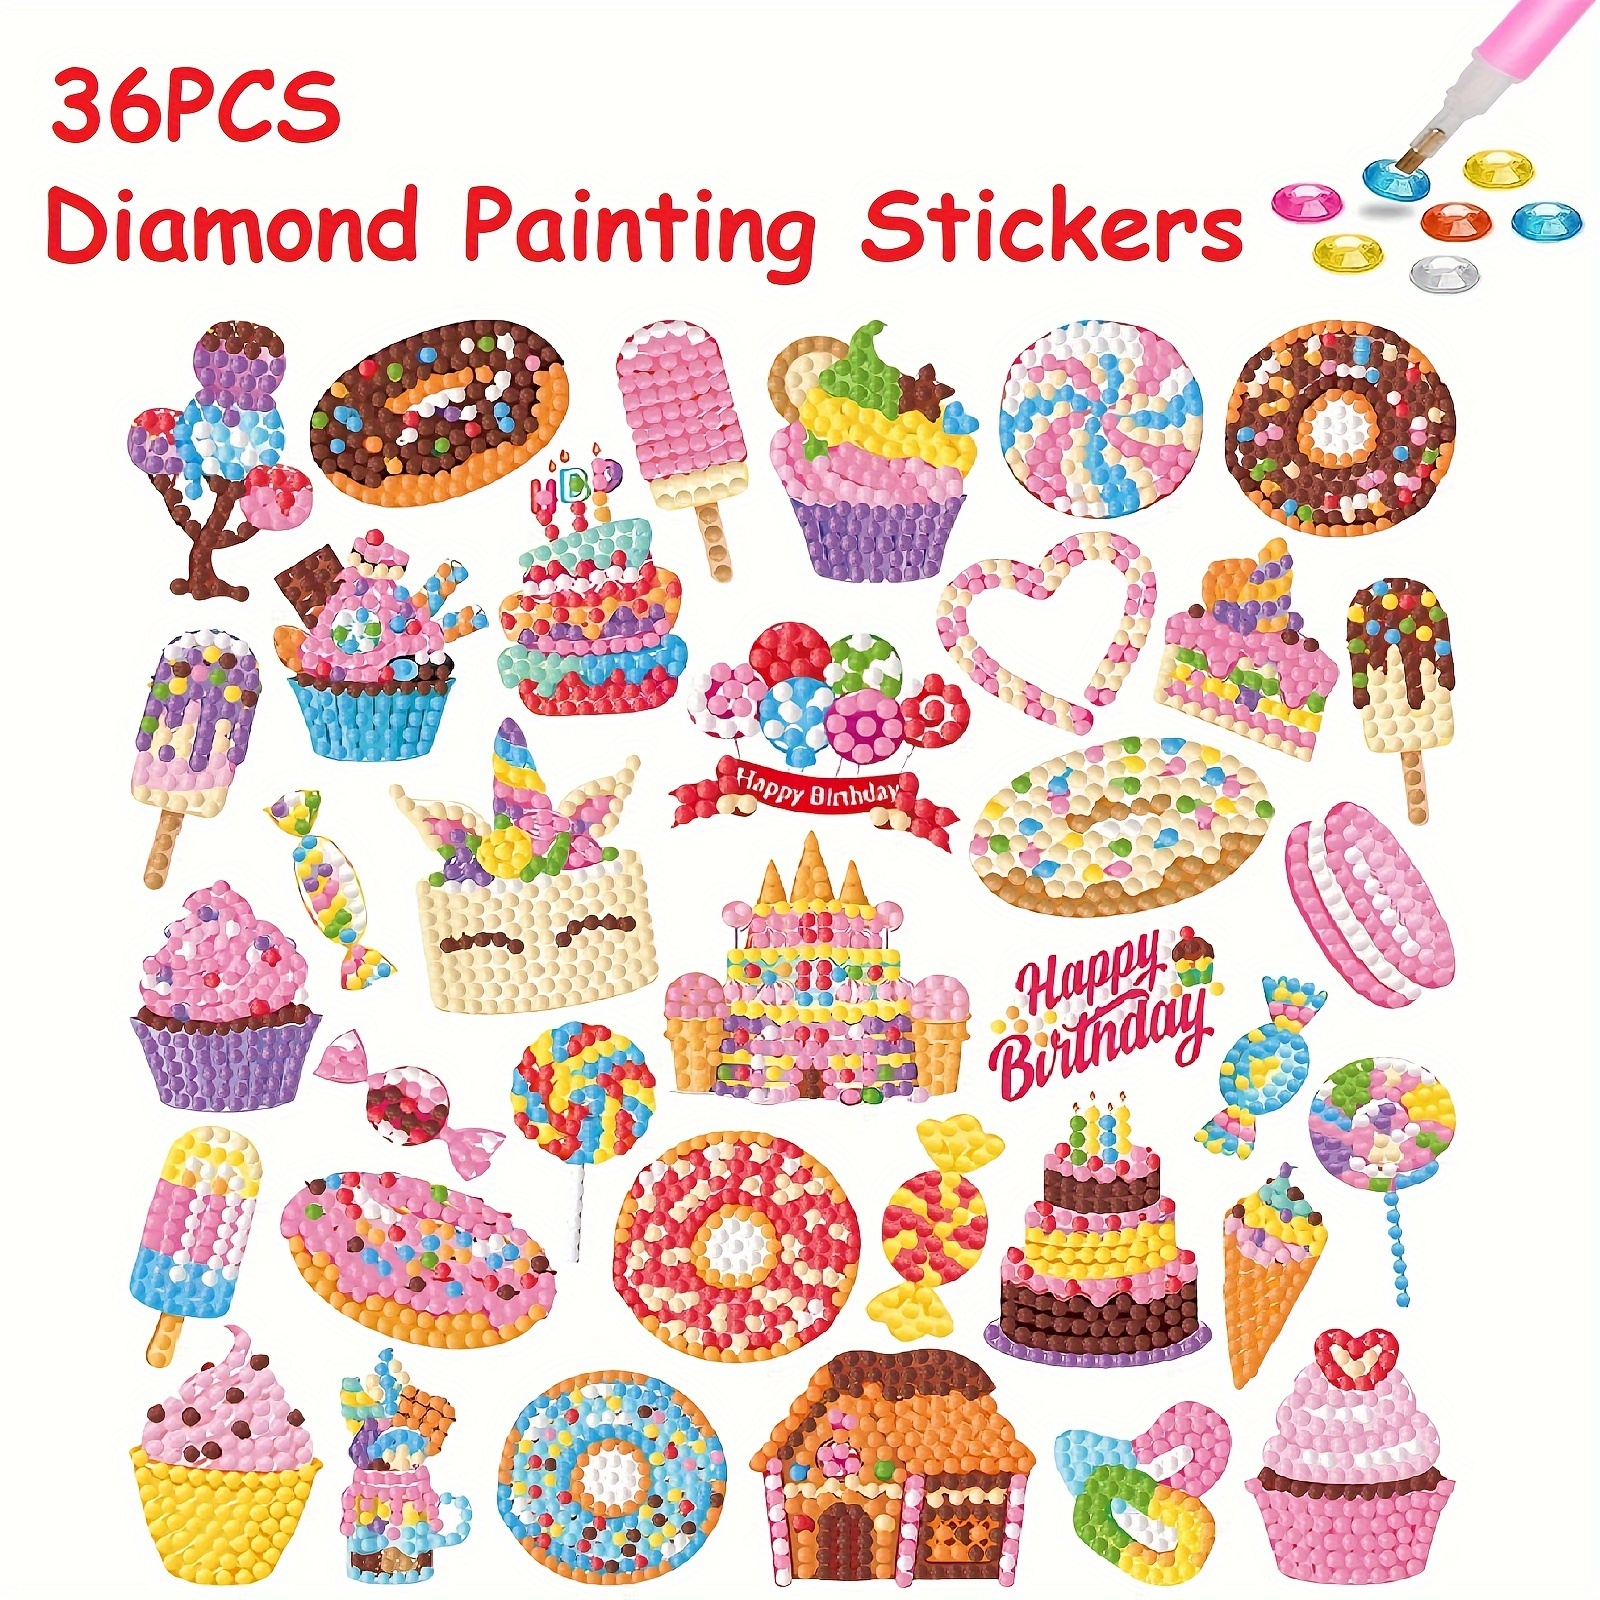  16PCS Diamond Painting Stickers Kits for Kids, Cartoon Anime Diamond  Painting Stickers Diamond Art Paint by Numbers Kit 5D Paint by Numbers  Diamonds Mosaic Stickers for Kids Beginners : Toys 